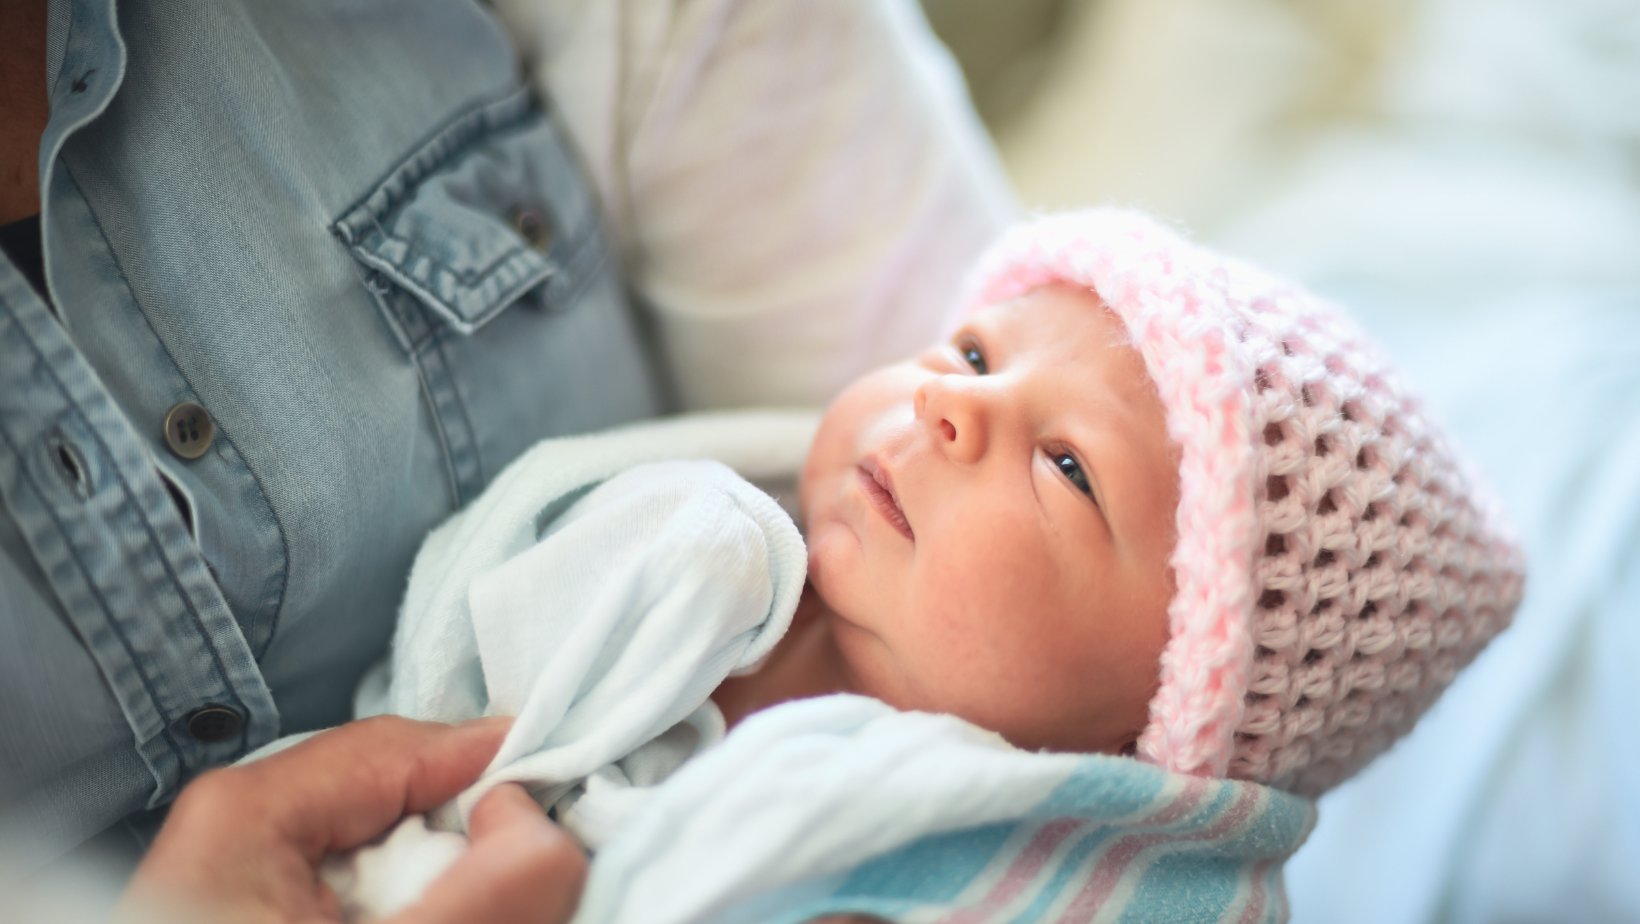 How To Manage Visitors In The Hospital When You’re Having A Baby